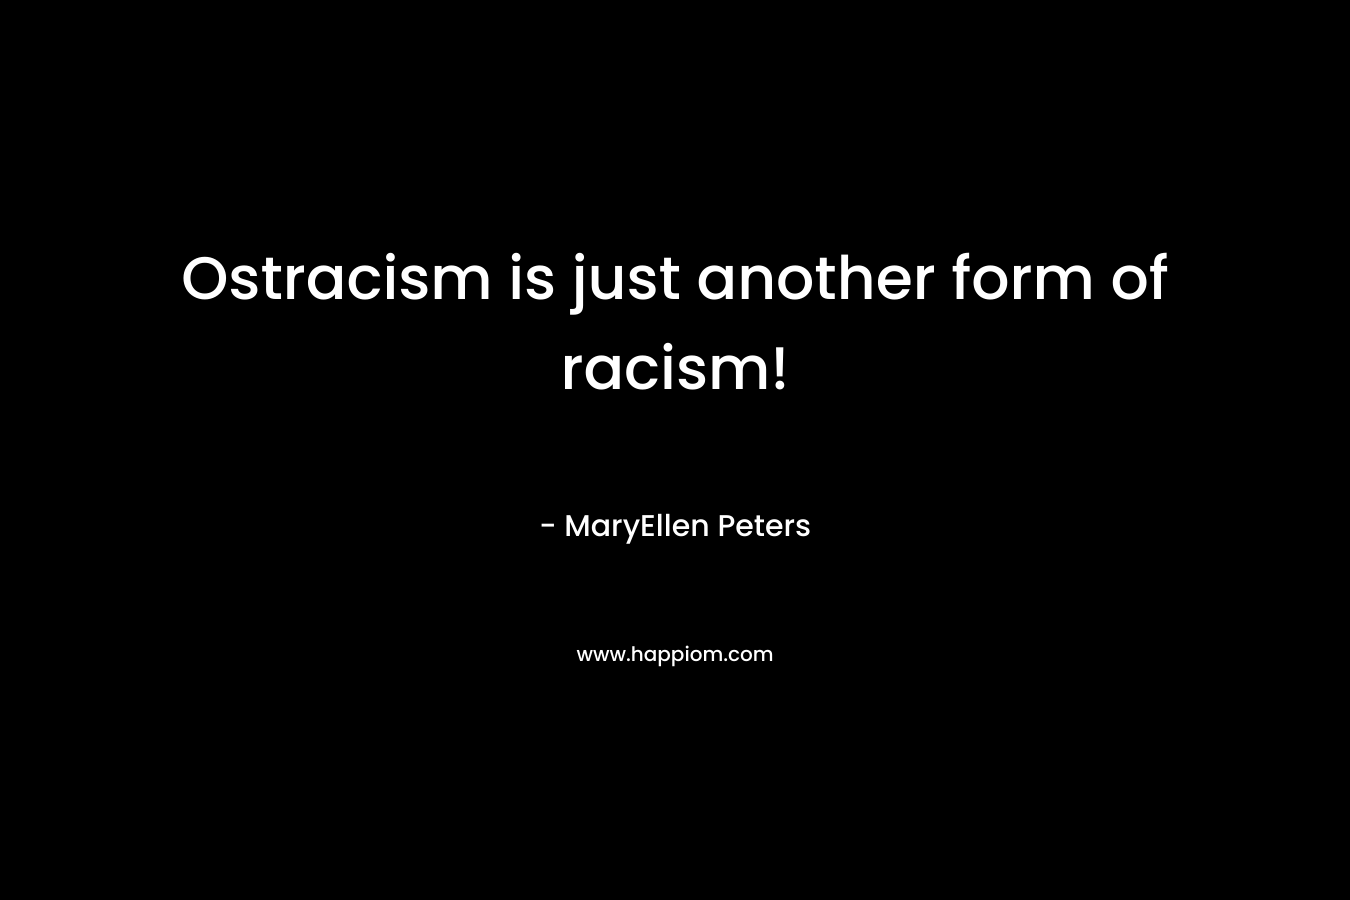 Ostracism is just another form of racism!